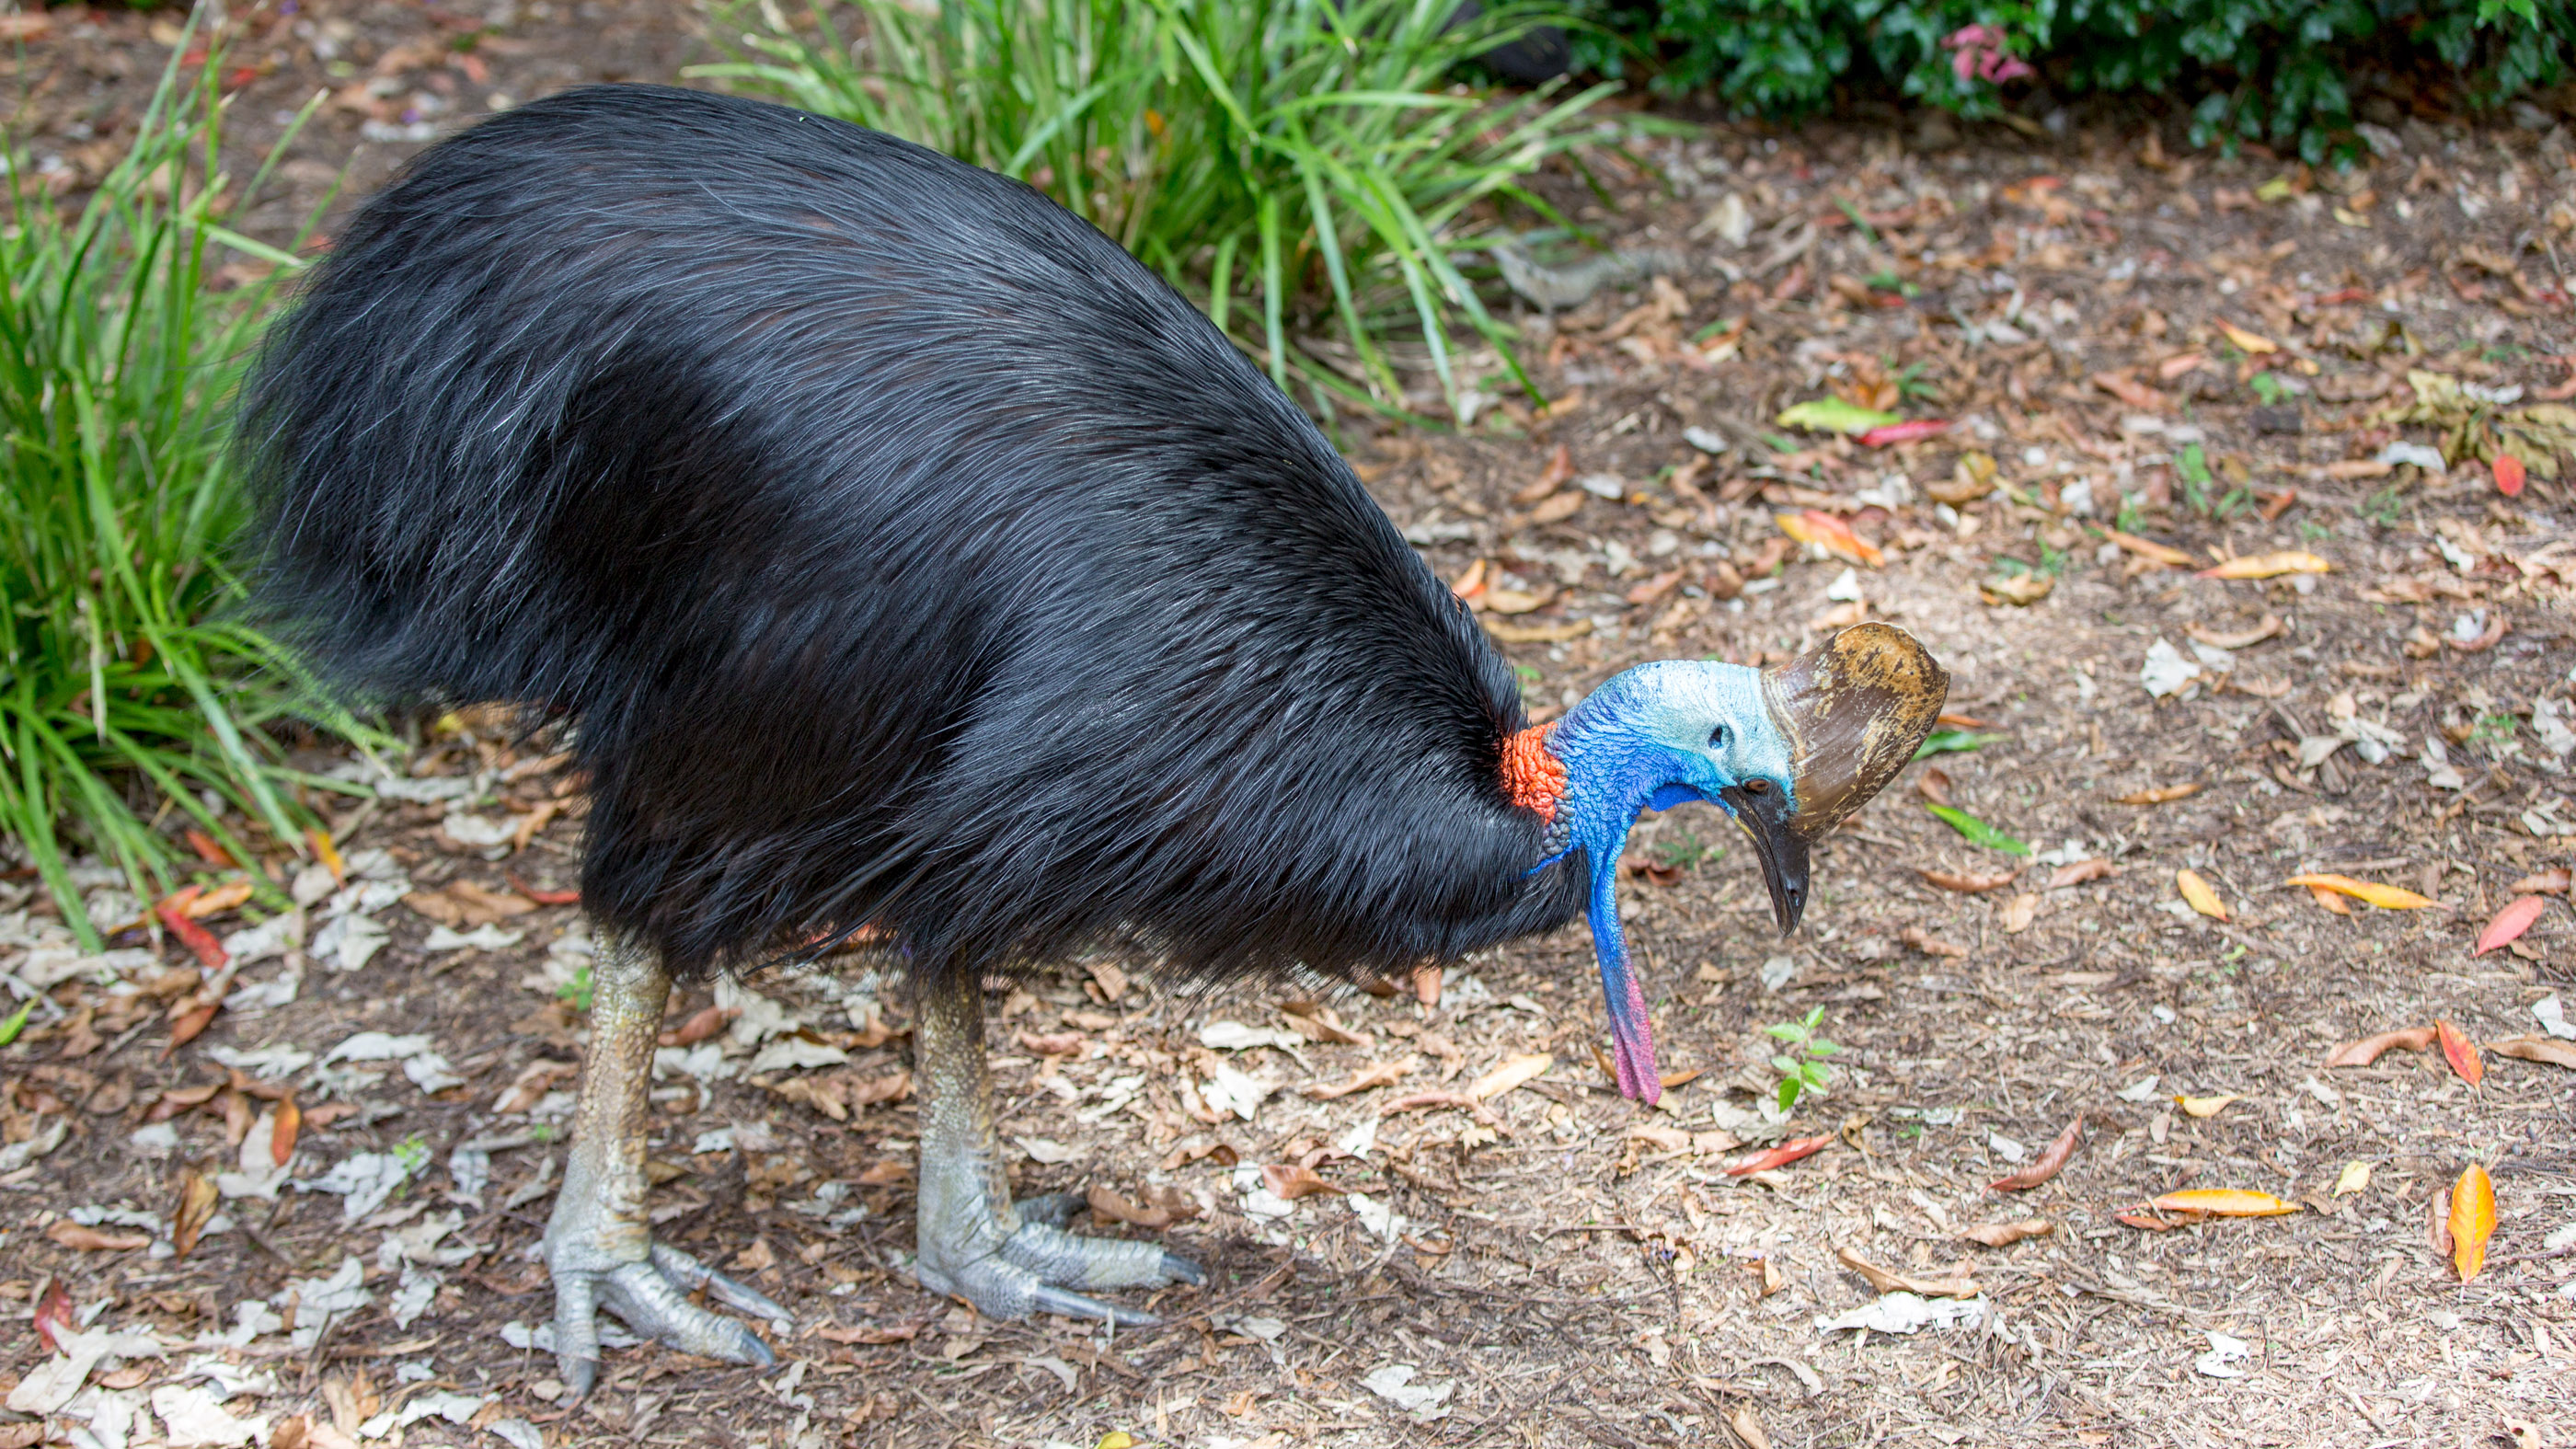 Southern cassowary is found in New Guinea as well as Queensland in northeastern Australia.